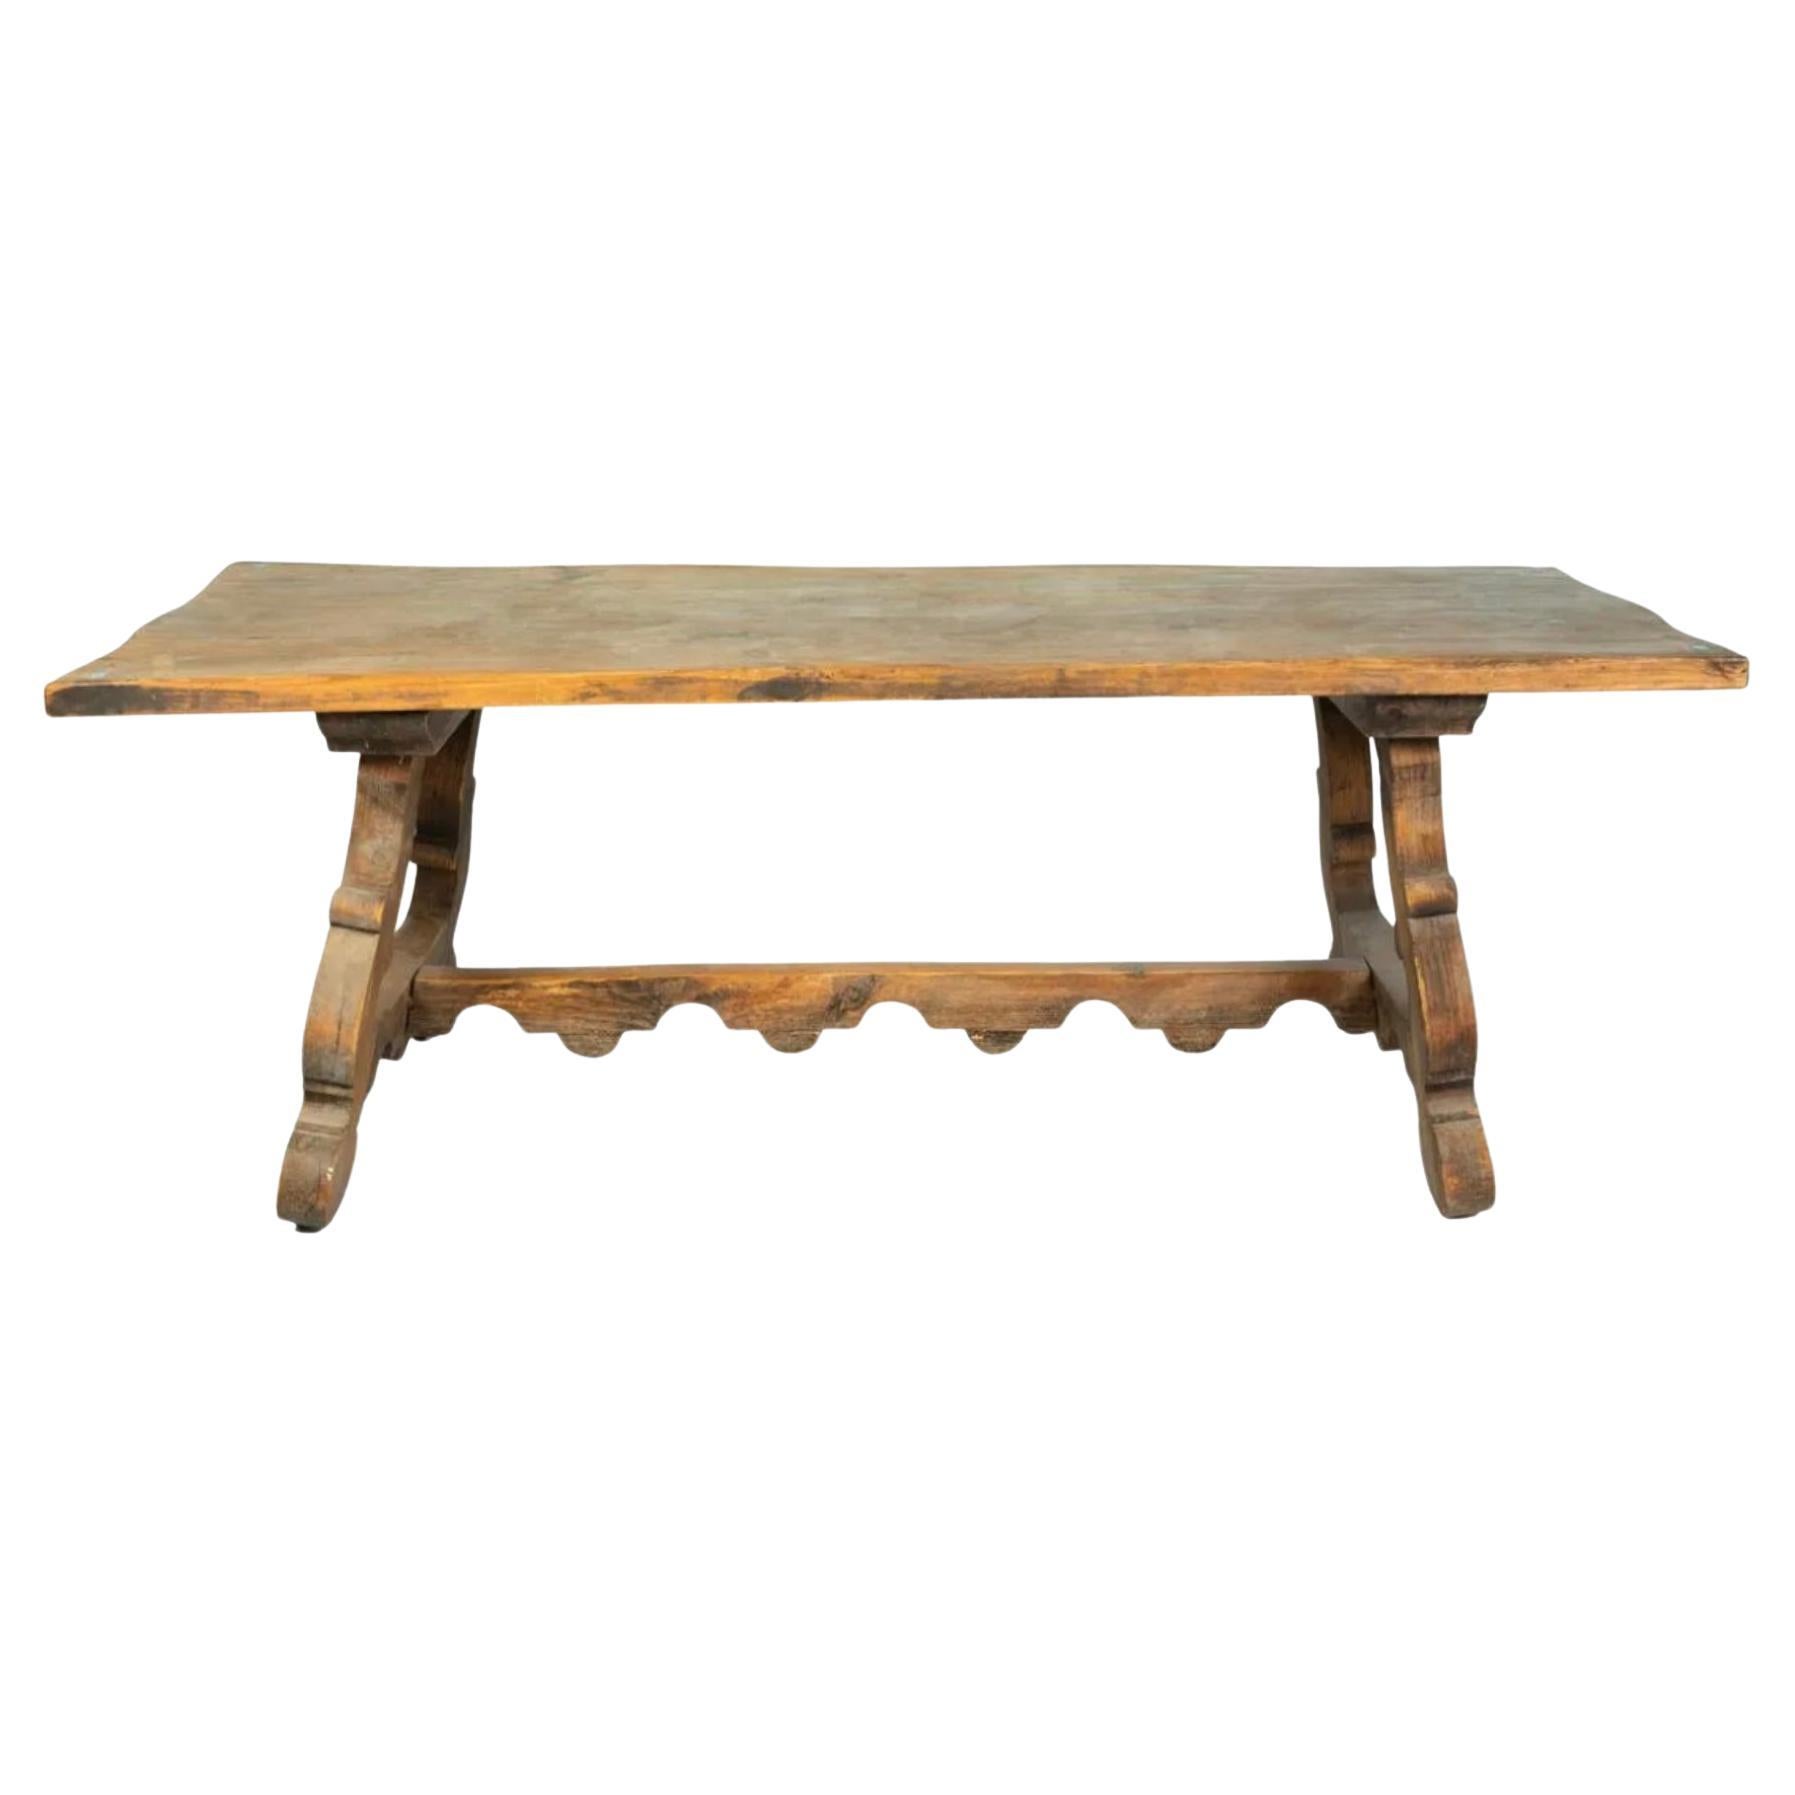 Early 20th Century Spanish Style Trestle Table